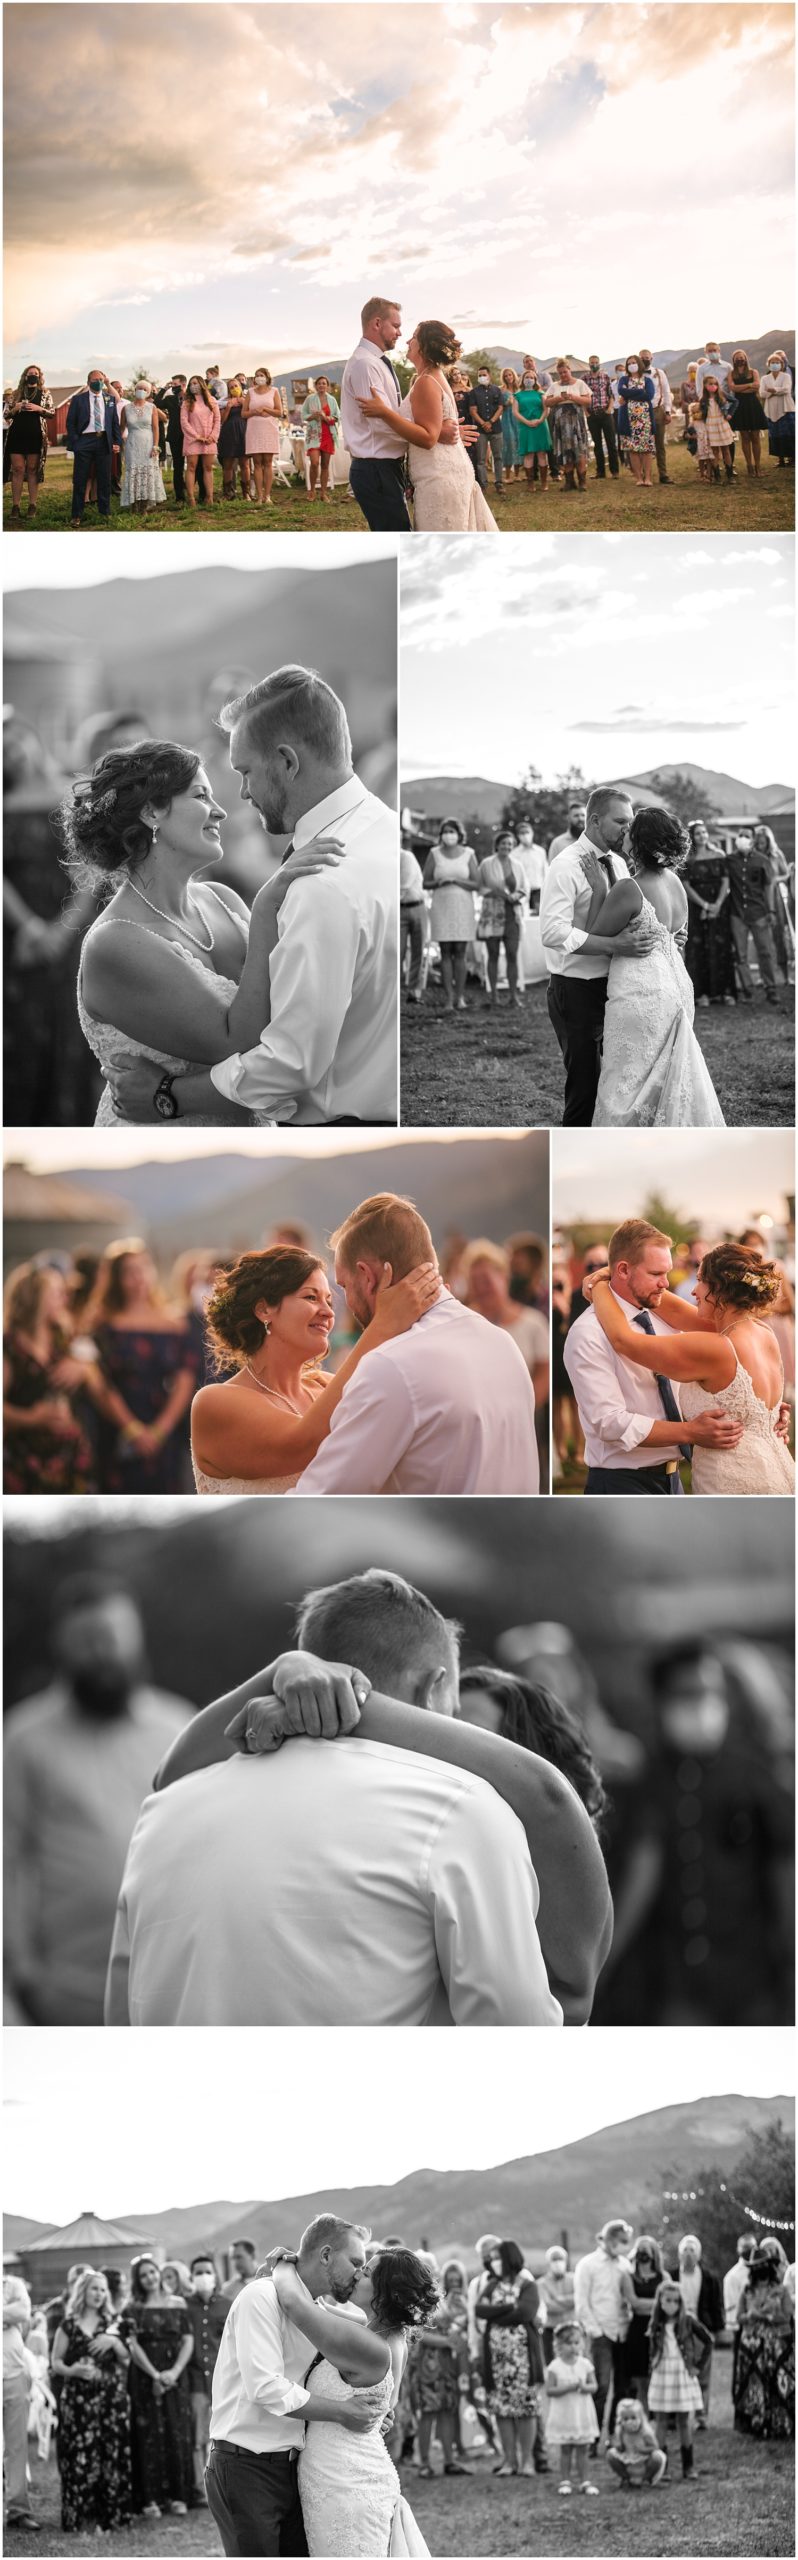 Bride and groom share first dance at Guyton Ranch wedding reception